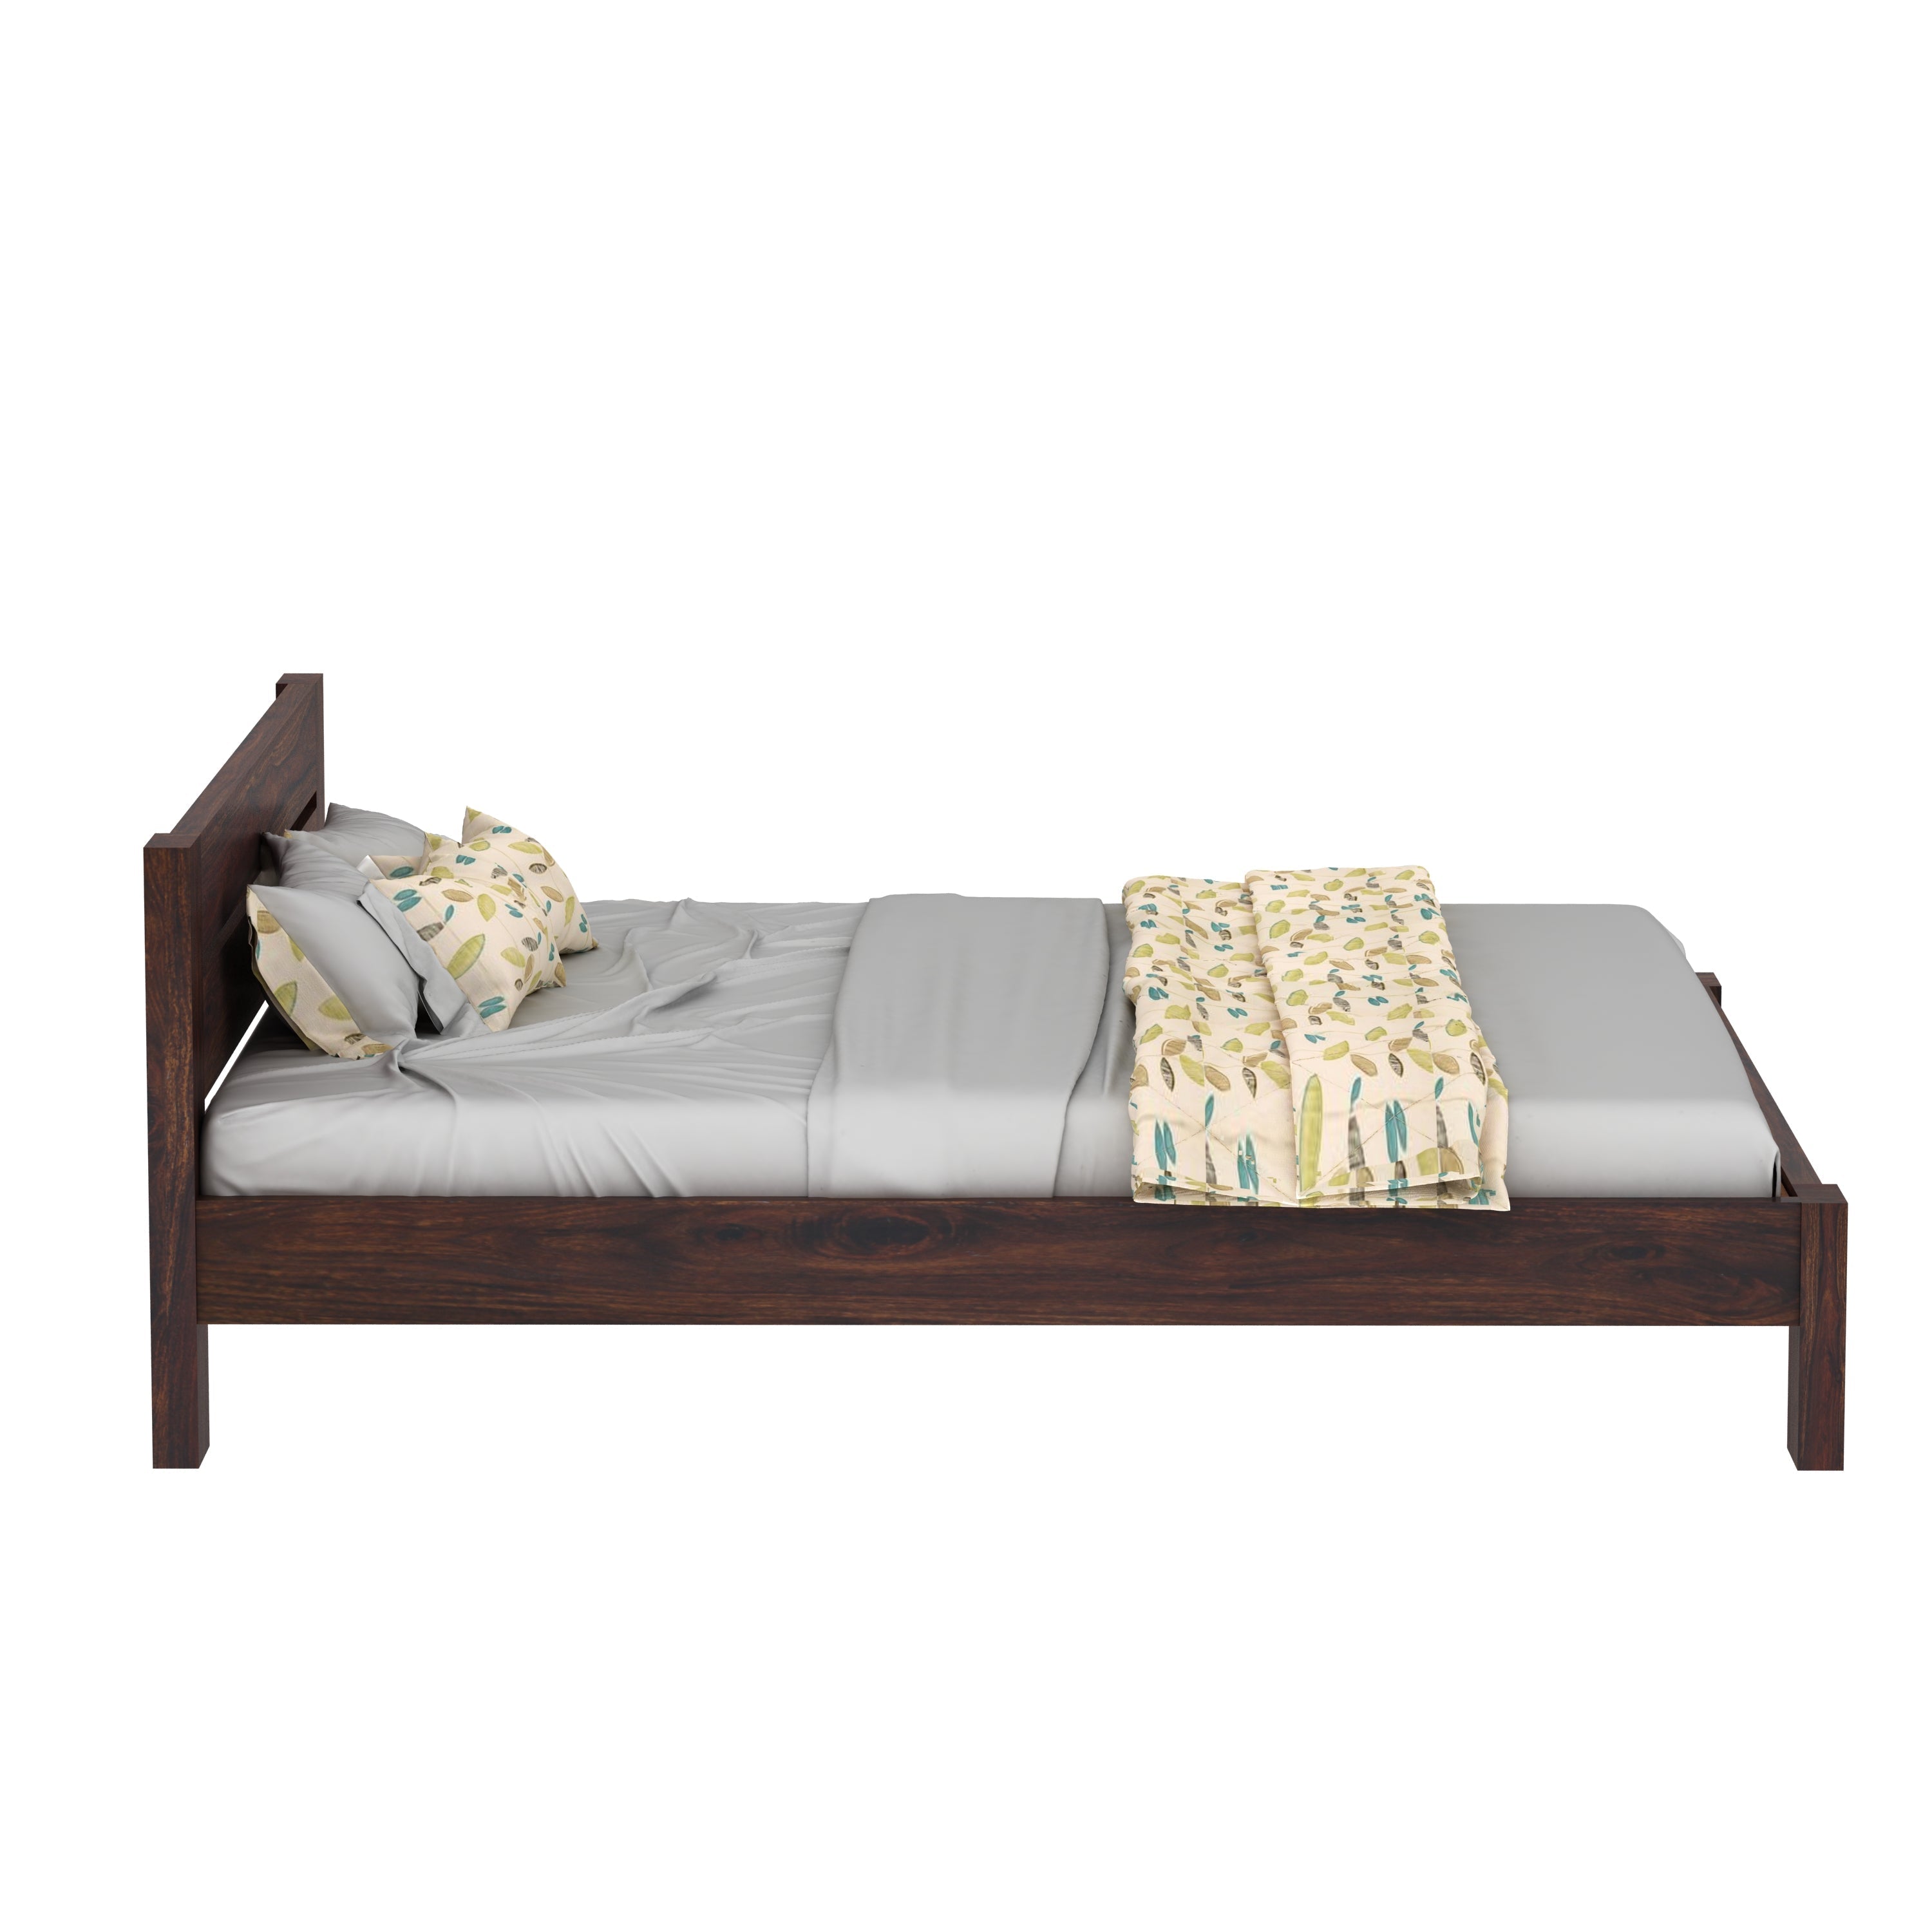 Maria Solid Sheesham Wood Bed Without Storage (Queen Size, Walnut Finish)